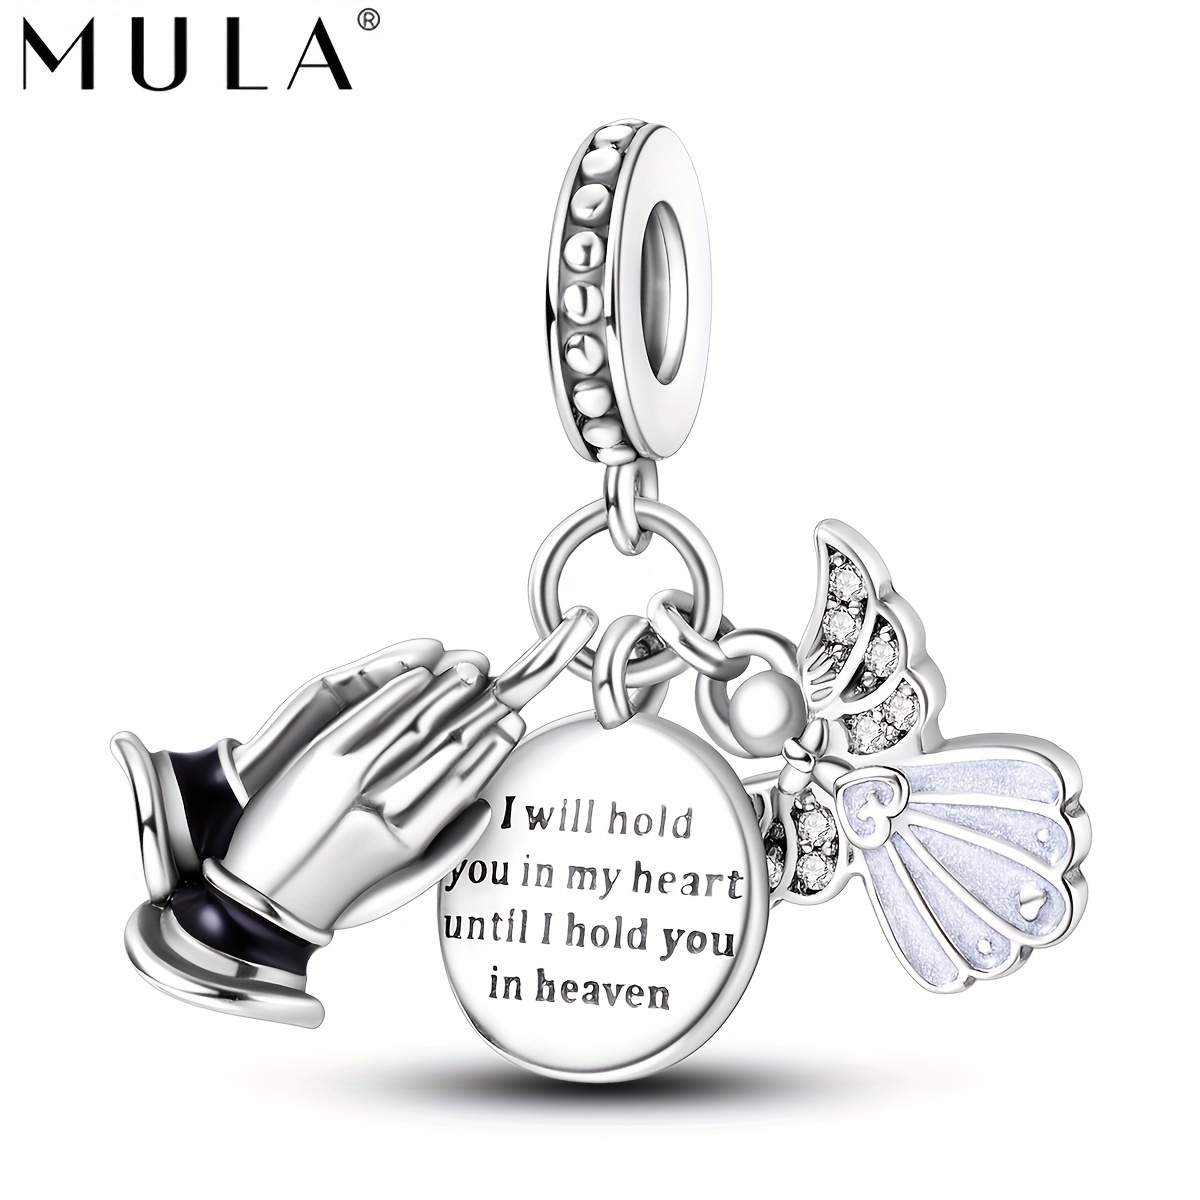 

Mula 925 Silver Plated Holy Zircon Pray Palm Heart Religious Charm Fit Original Bracelet Necklace Pendant Beads For Diy Jewelry Making Daily Gift For Friend